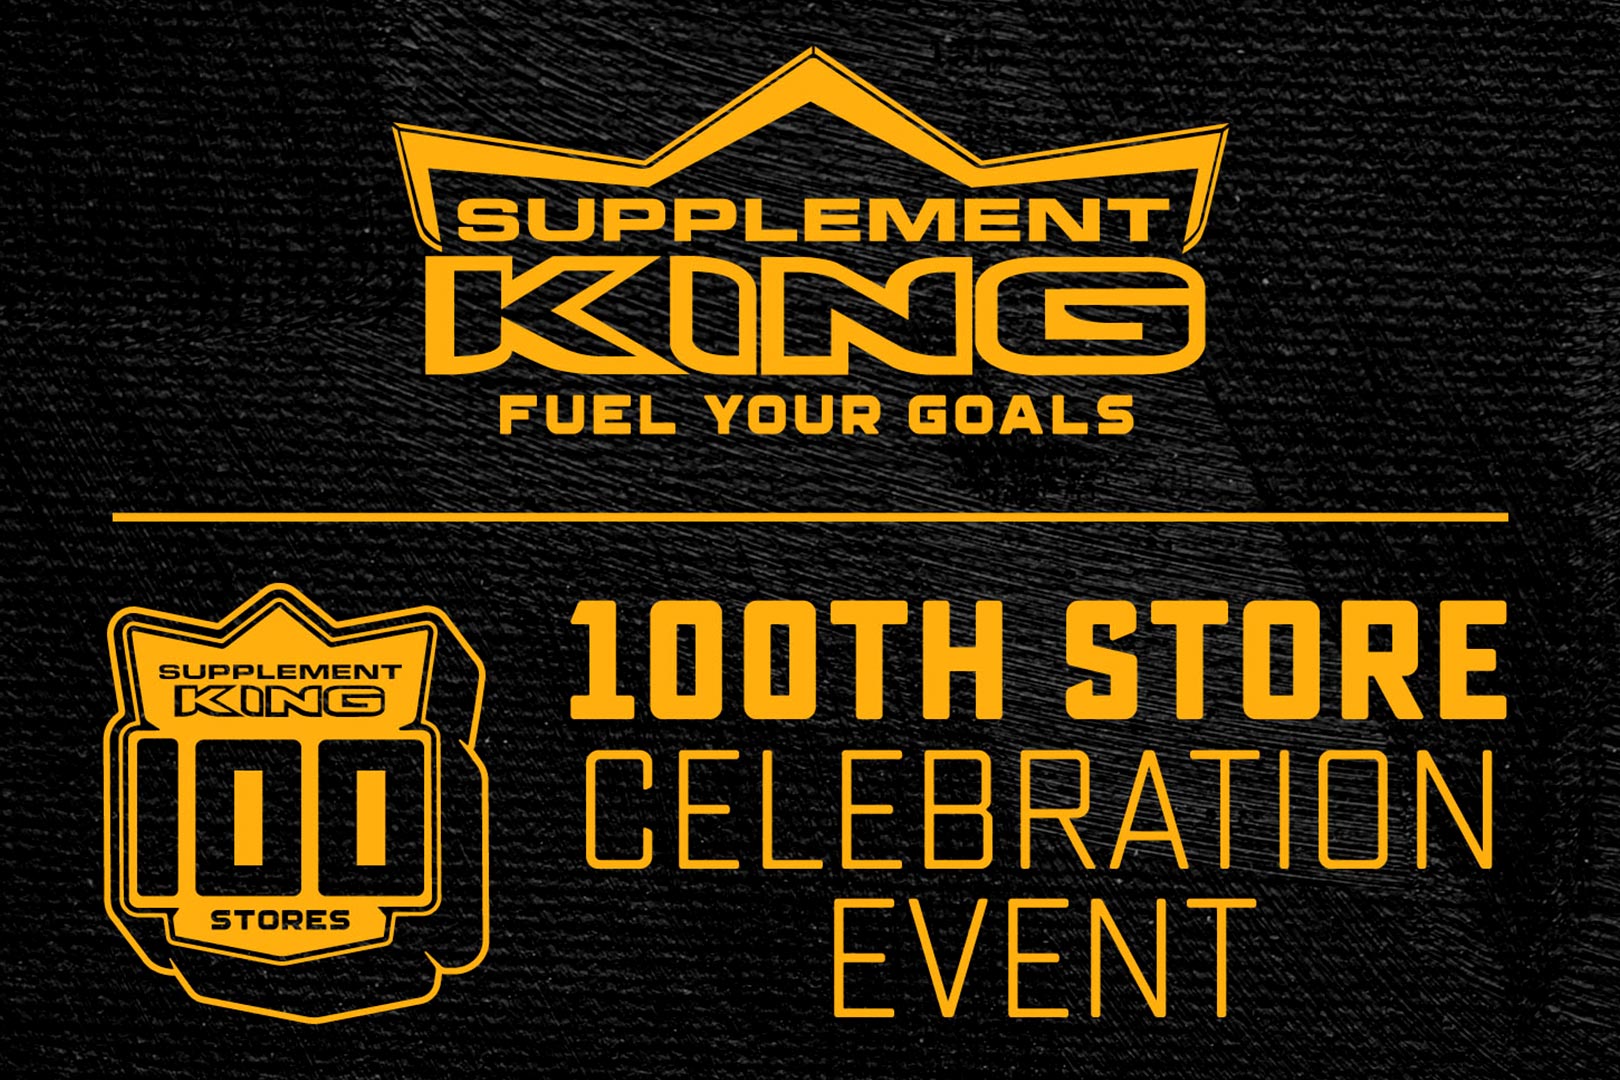 Supplement King 100th Store Celebration